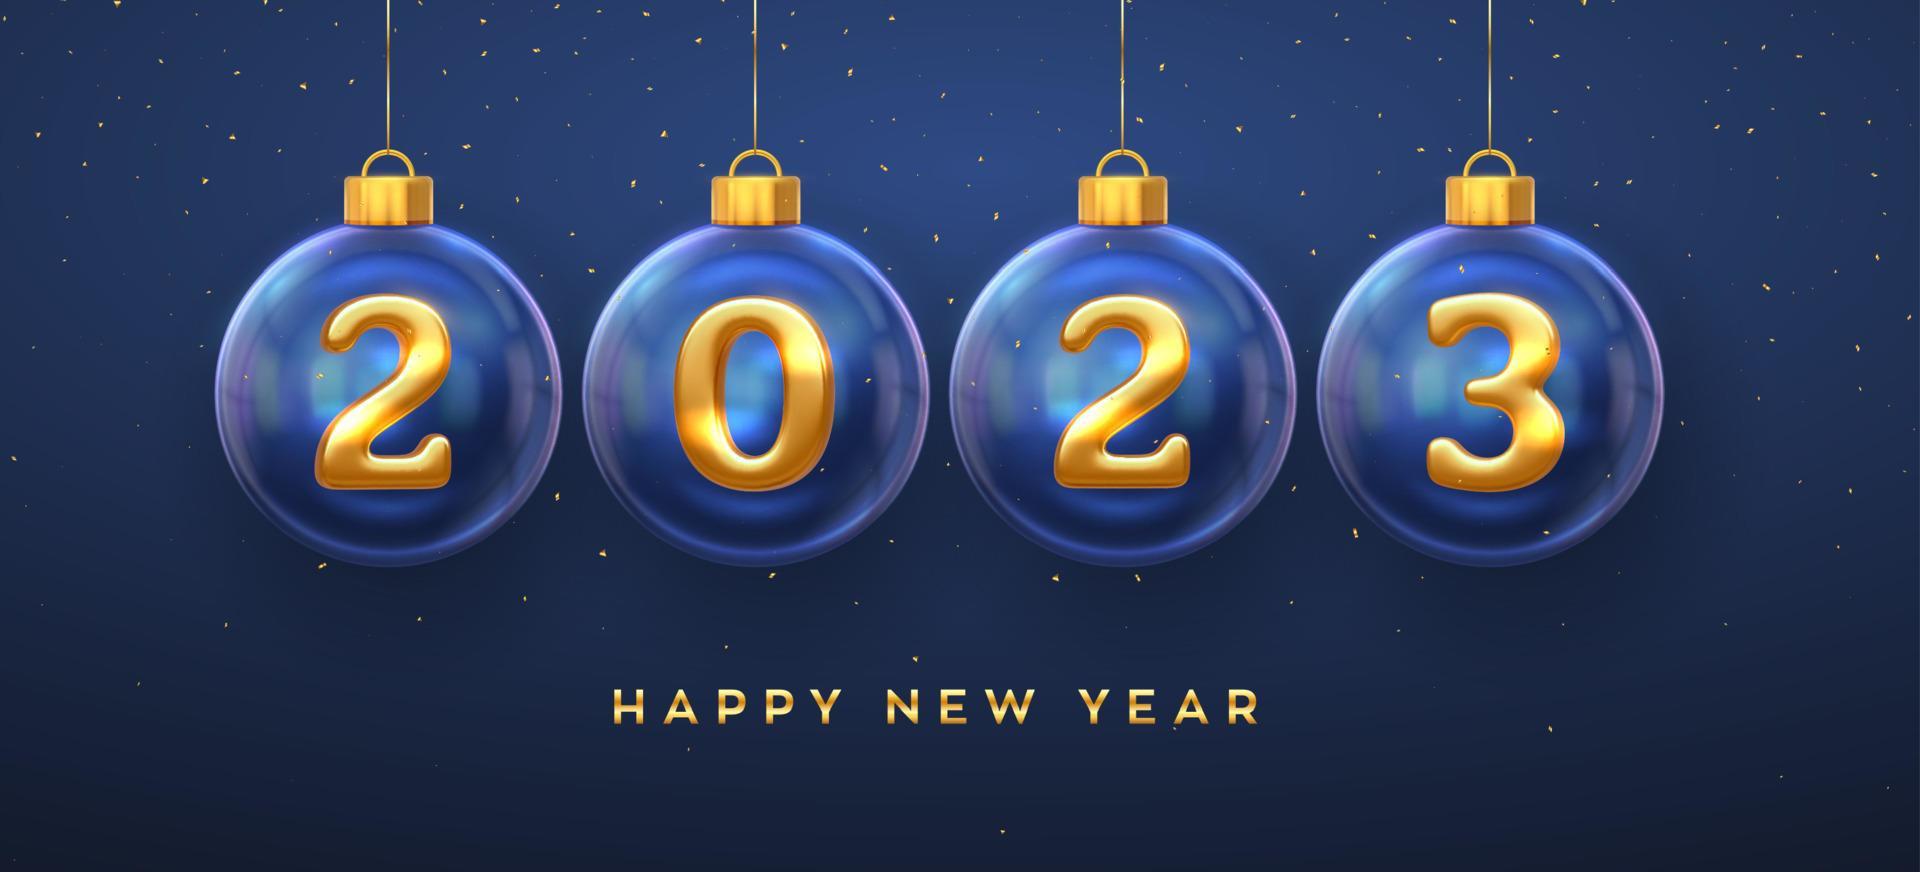 Cool Happy New Year 2023 Facebook Cover Picture HD